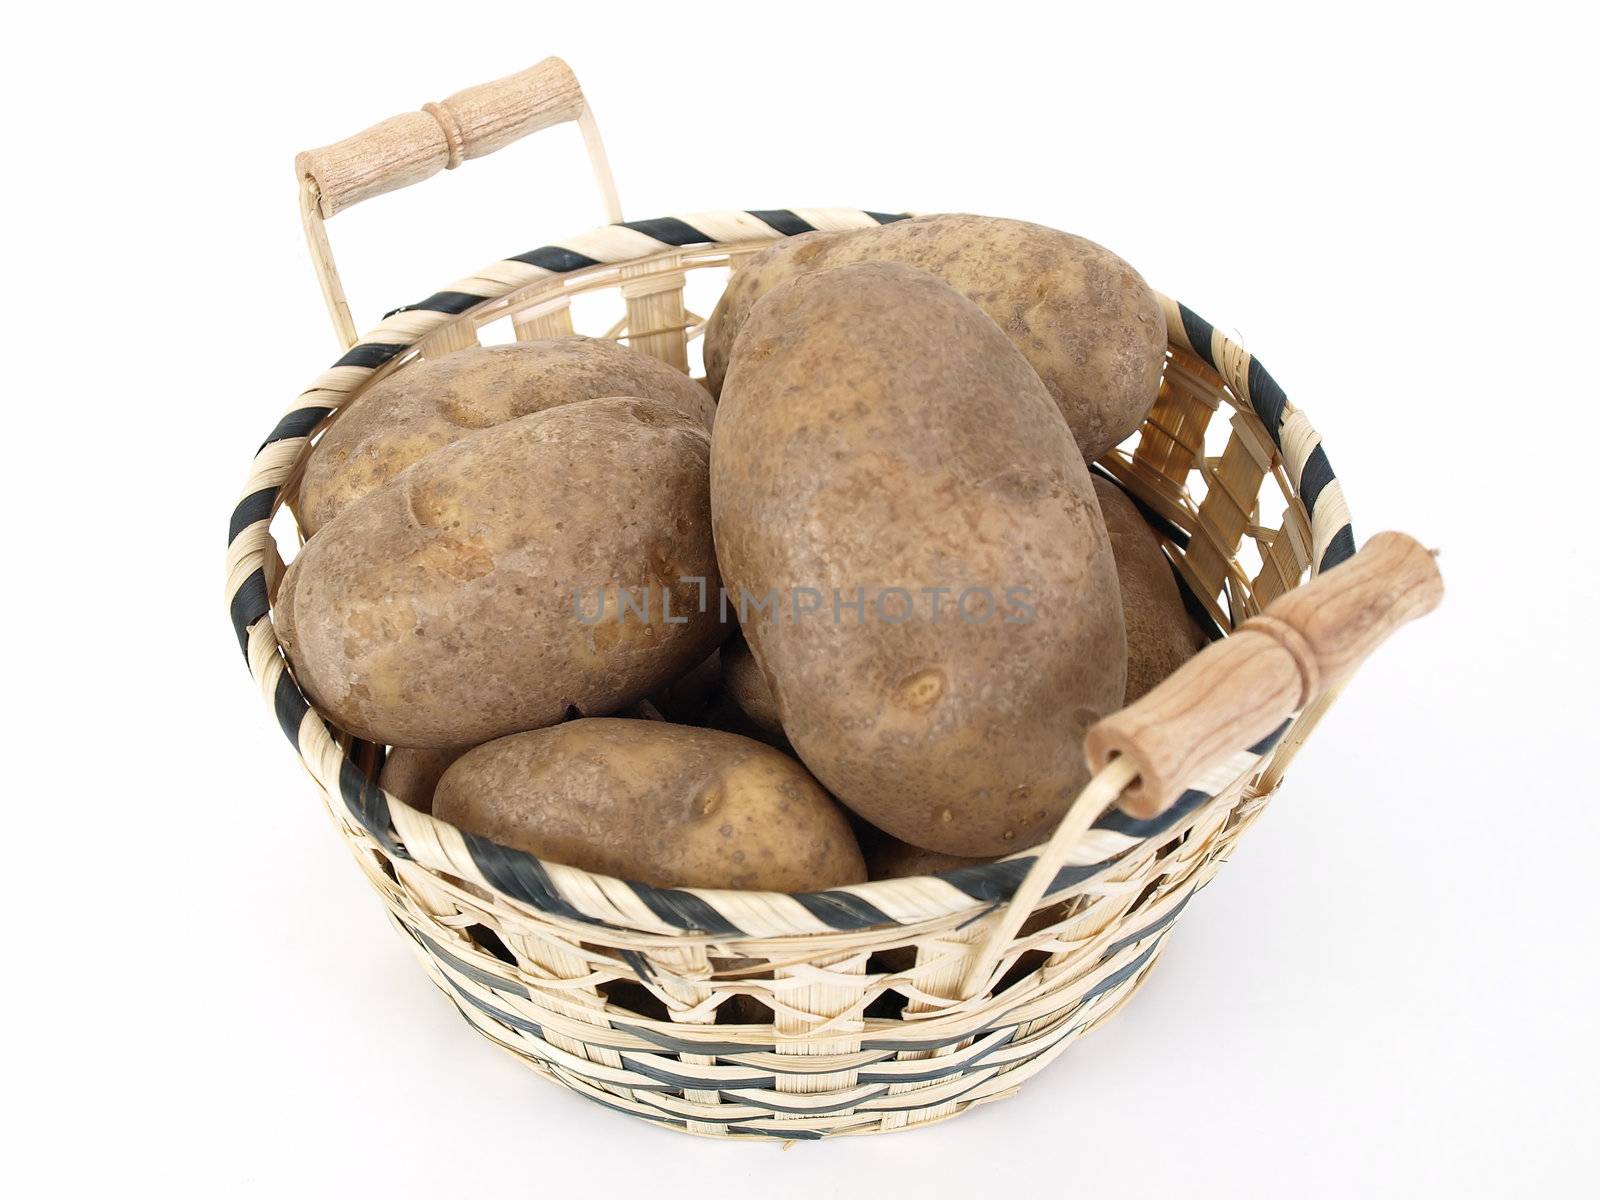 A wicker basket full of large baker potatoes. Over a white background